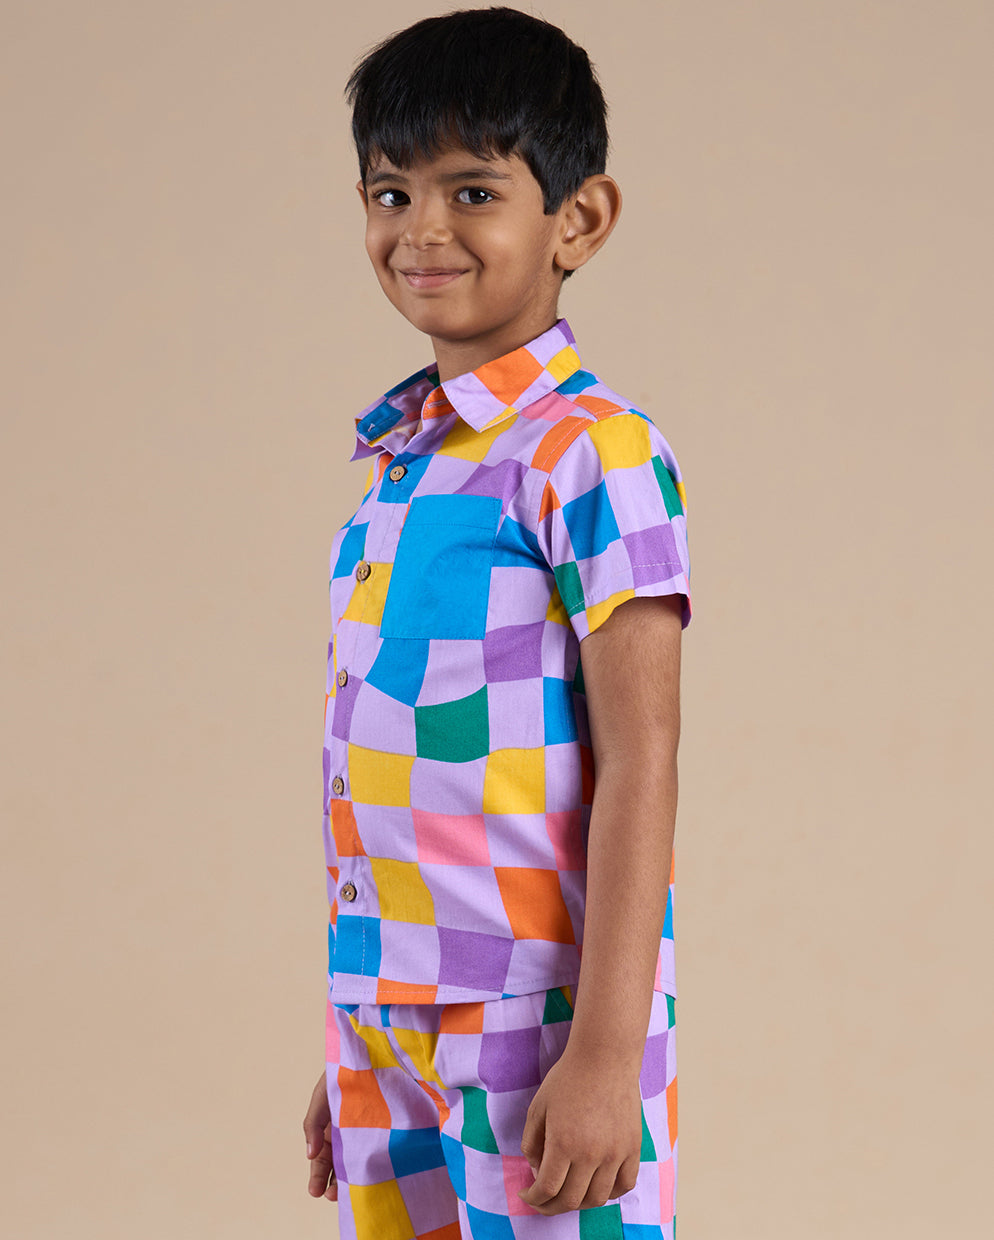 Snakes And Ladders Boys Multi Color Rotary Print Shirt From Siblings Collection - Lil Drama